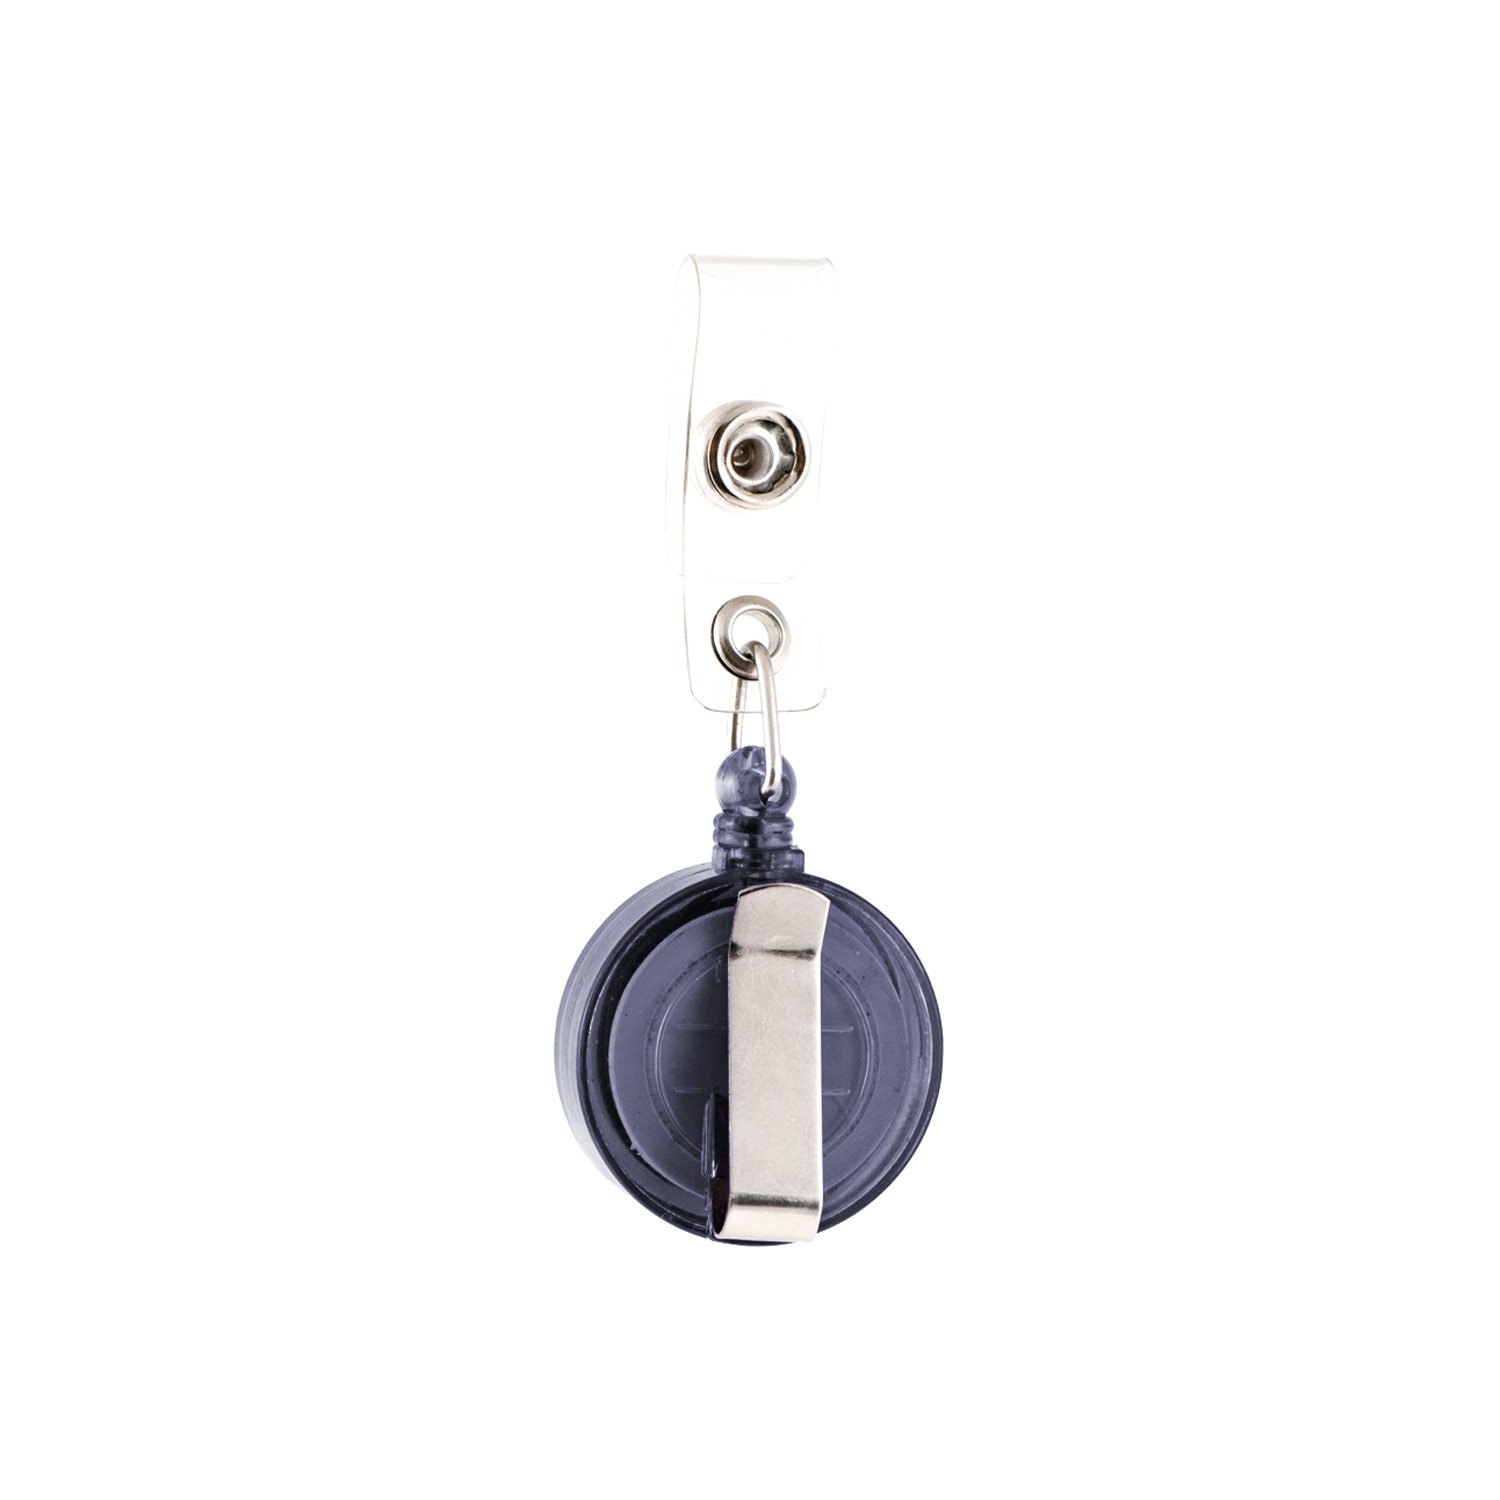 Drums Badge Holder With Retractable Reel, Badge Holder